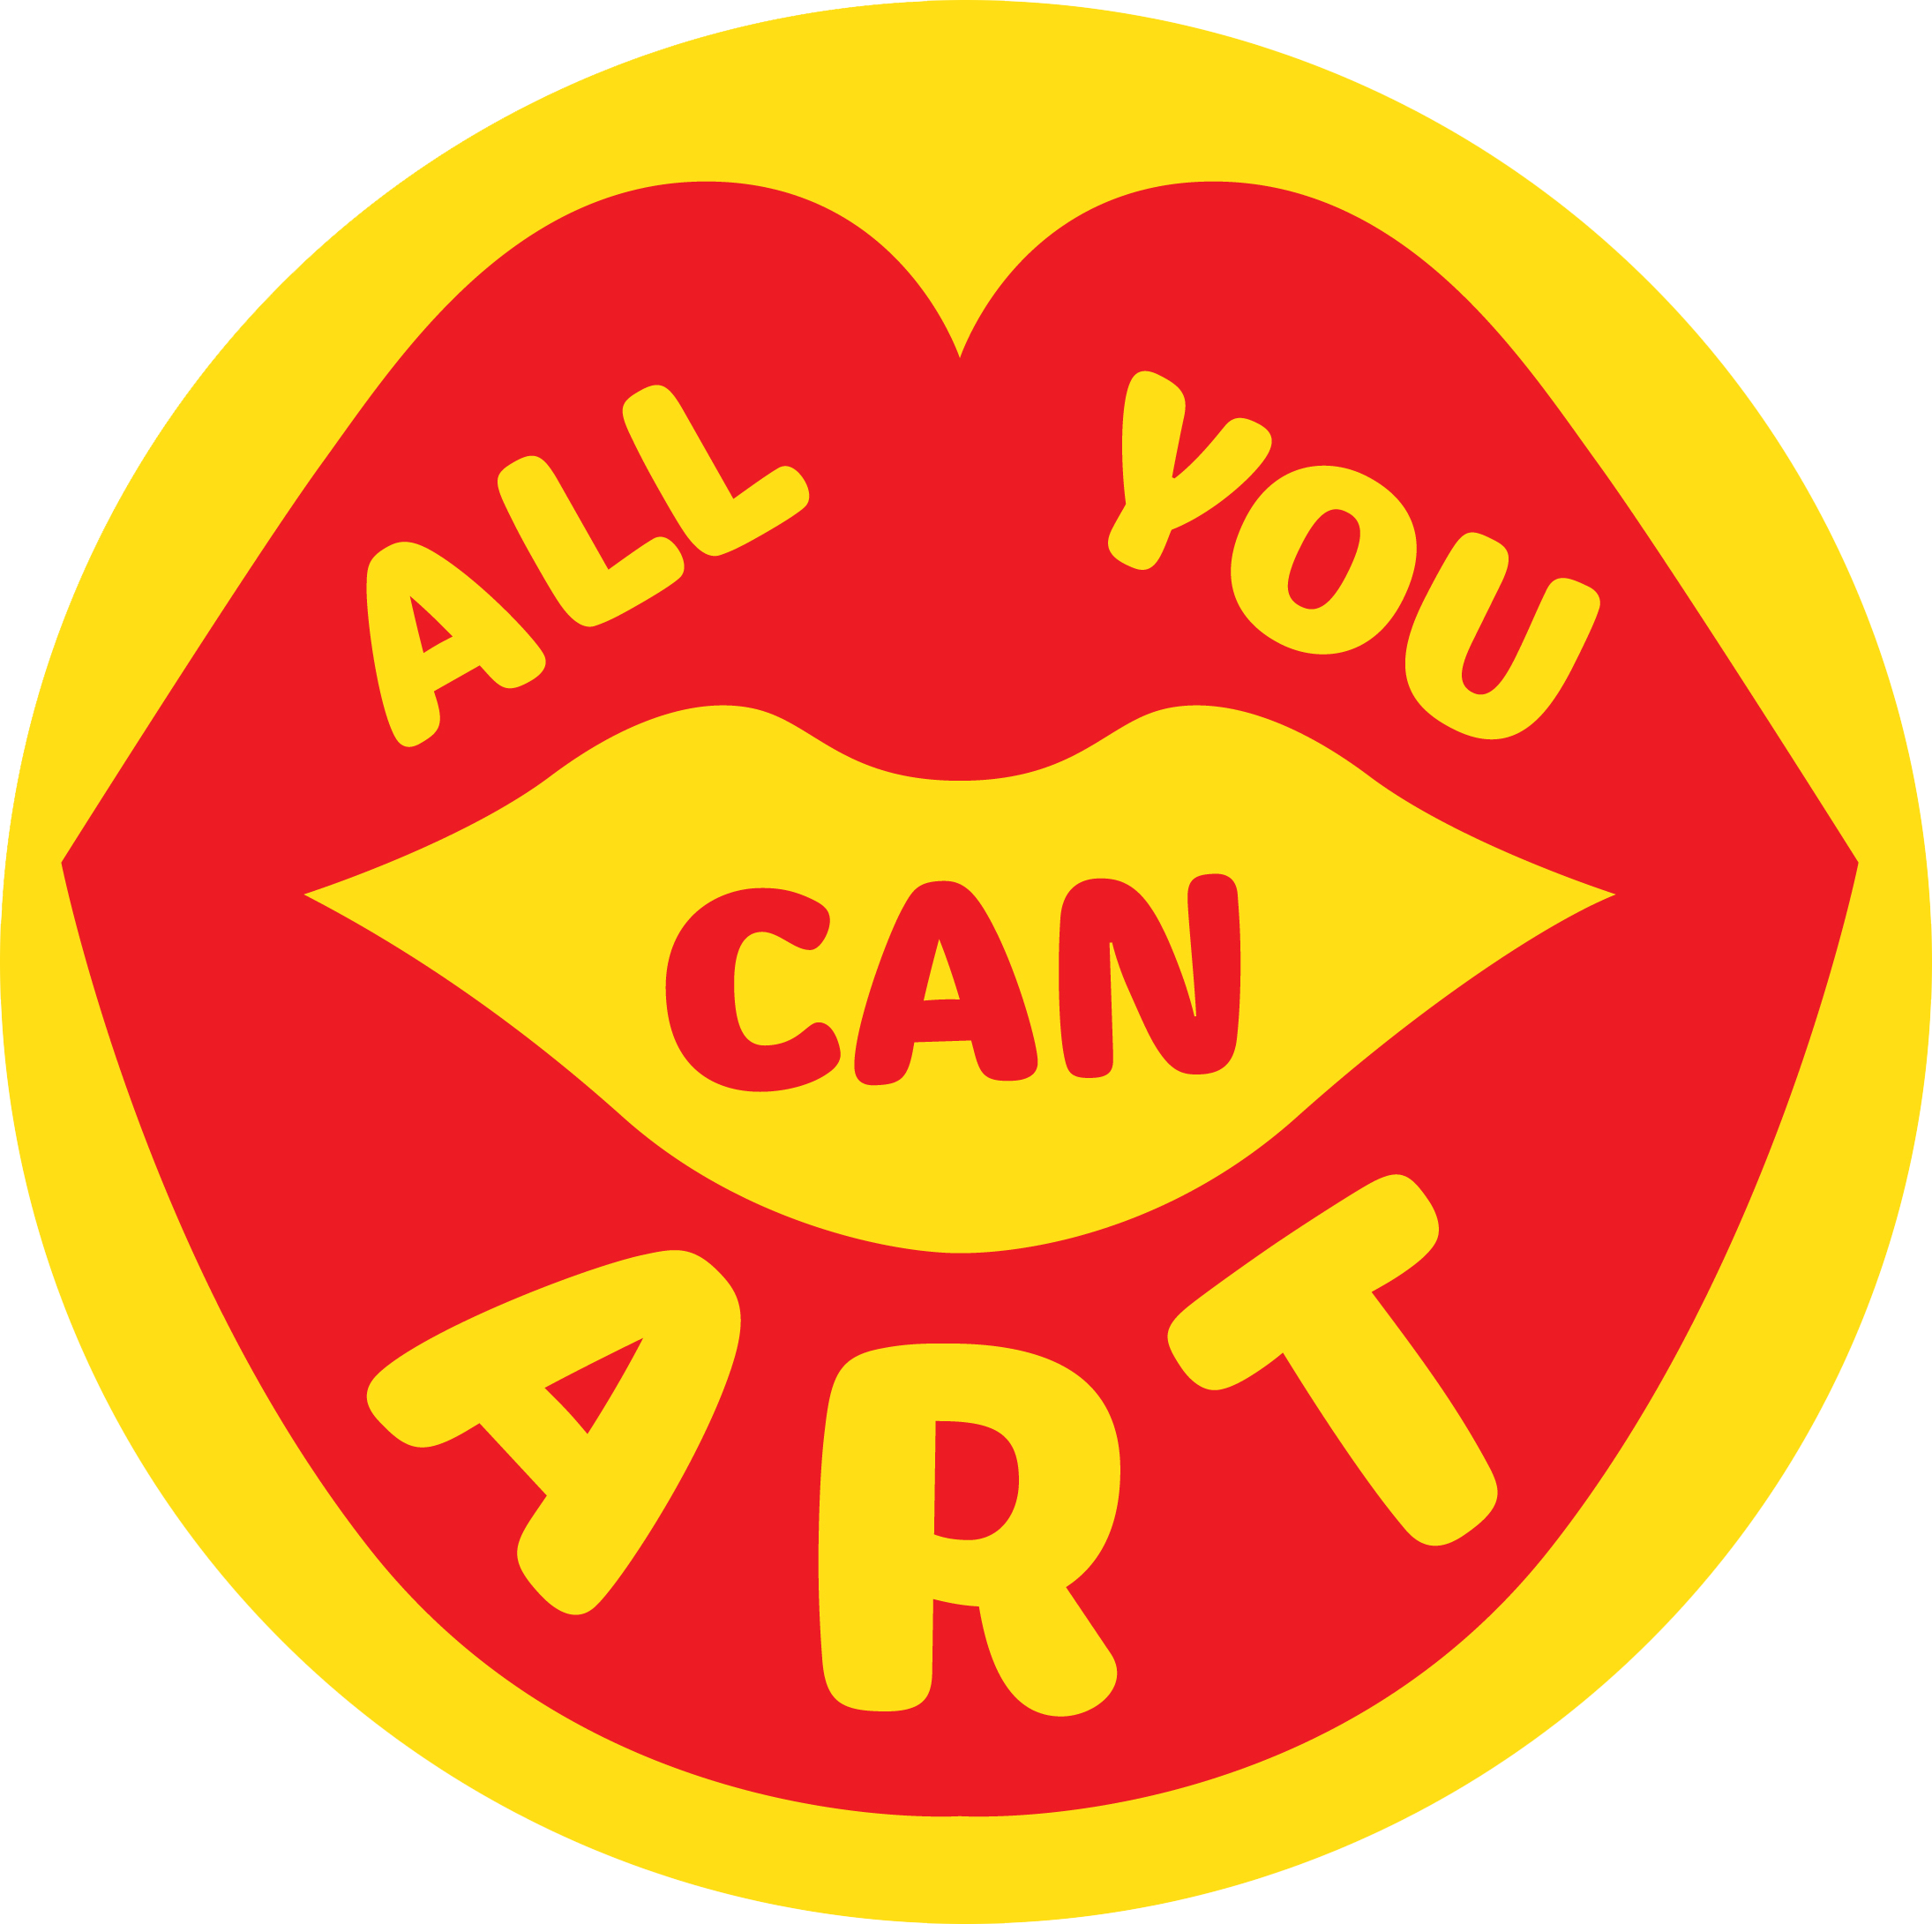 All you can art_logo rond_HR.png